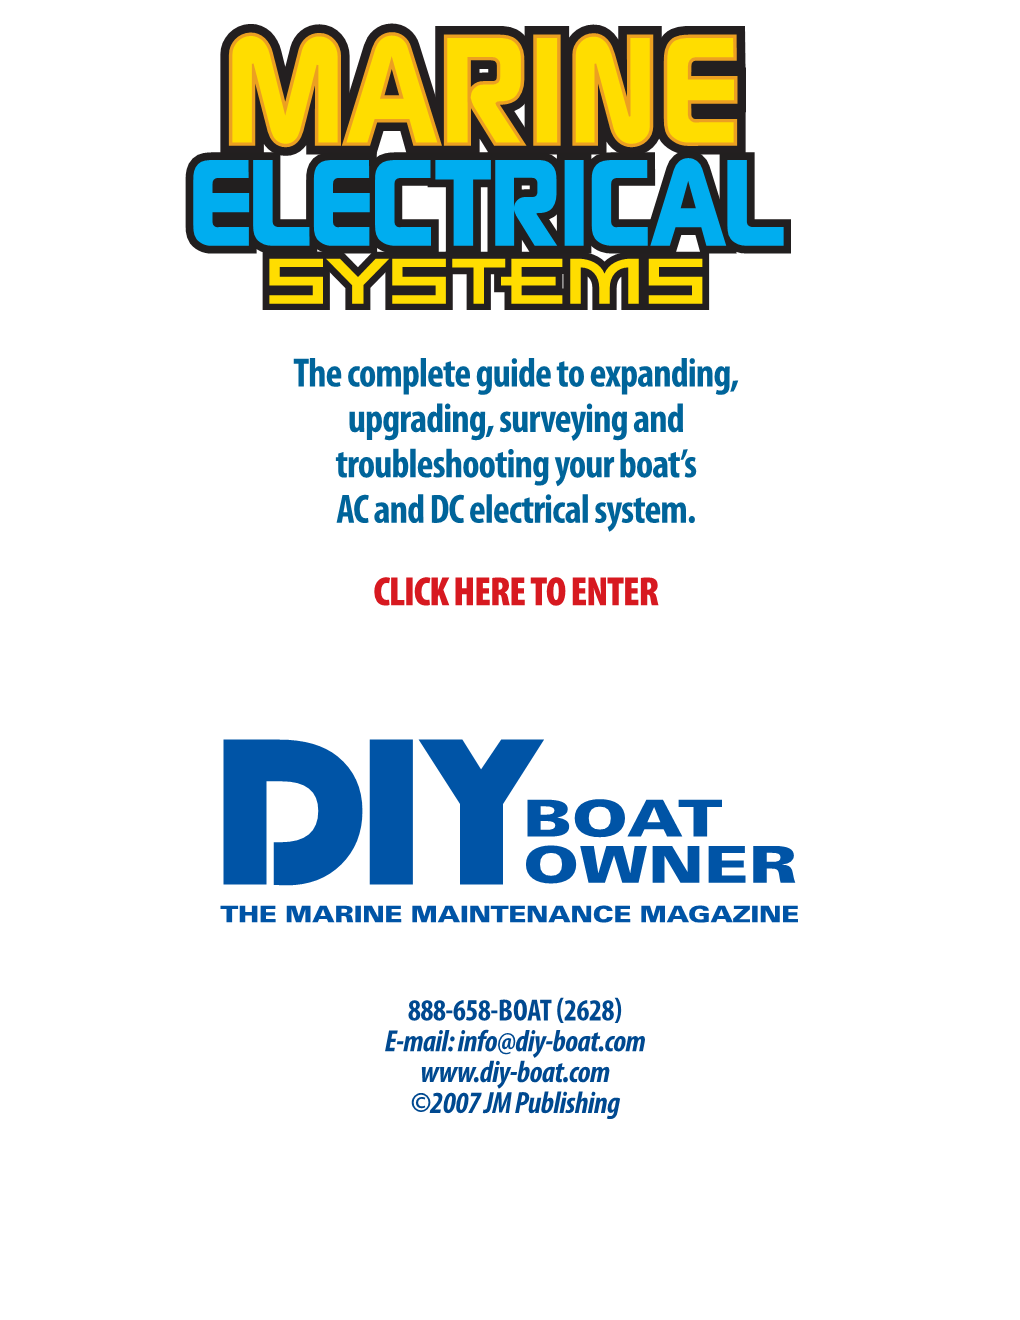 The Complete Guide to Expanding, Upgrading, Surveying and Troubleshooting Your Boat's AC and DC Electrical System. CLICK HERE